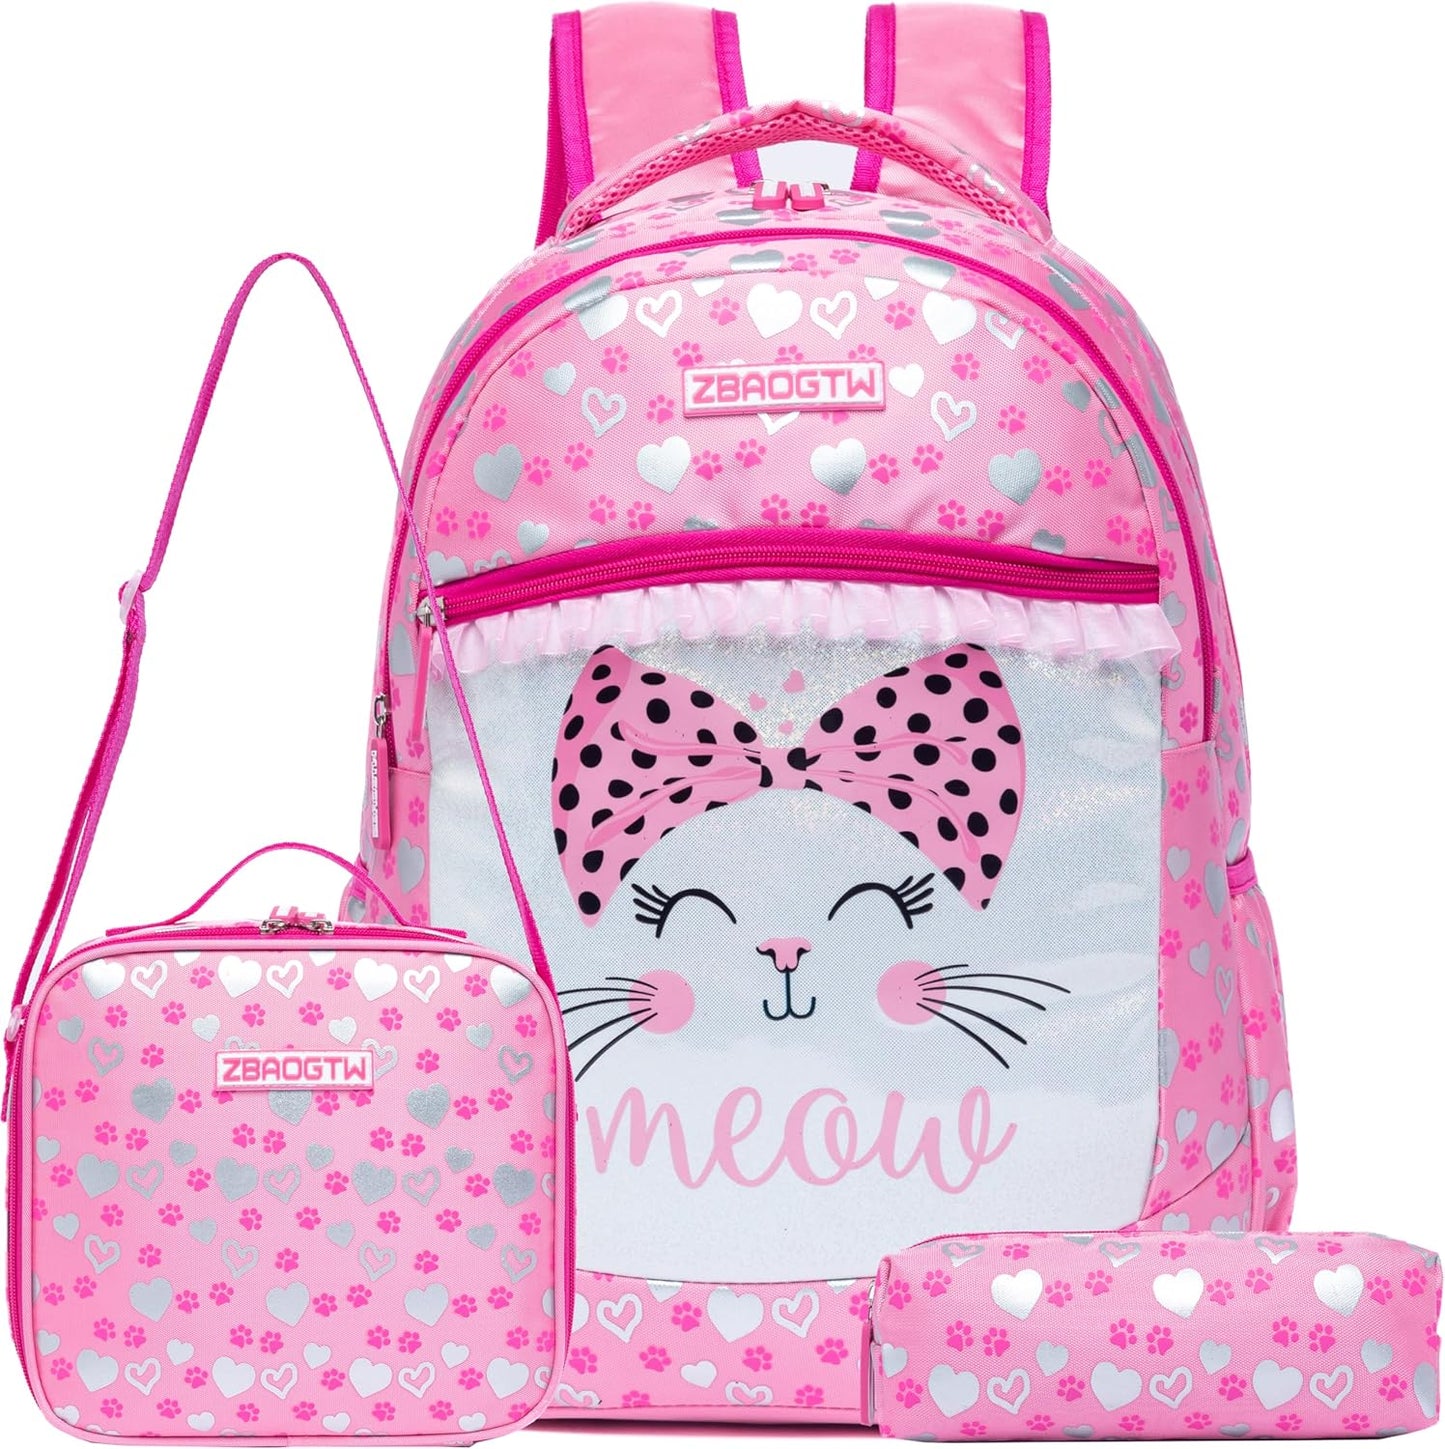 Cute Cat Backpacks for Girls School Backpack with Lunch Box Pencil Case for Elementary Student Kids Travel Bookbag for Girls Ages 6-8 Years Old